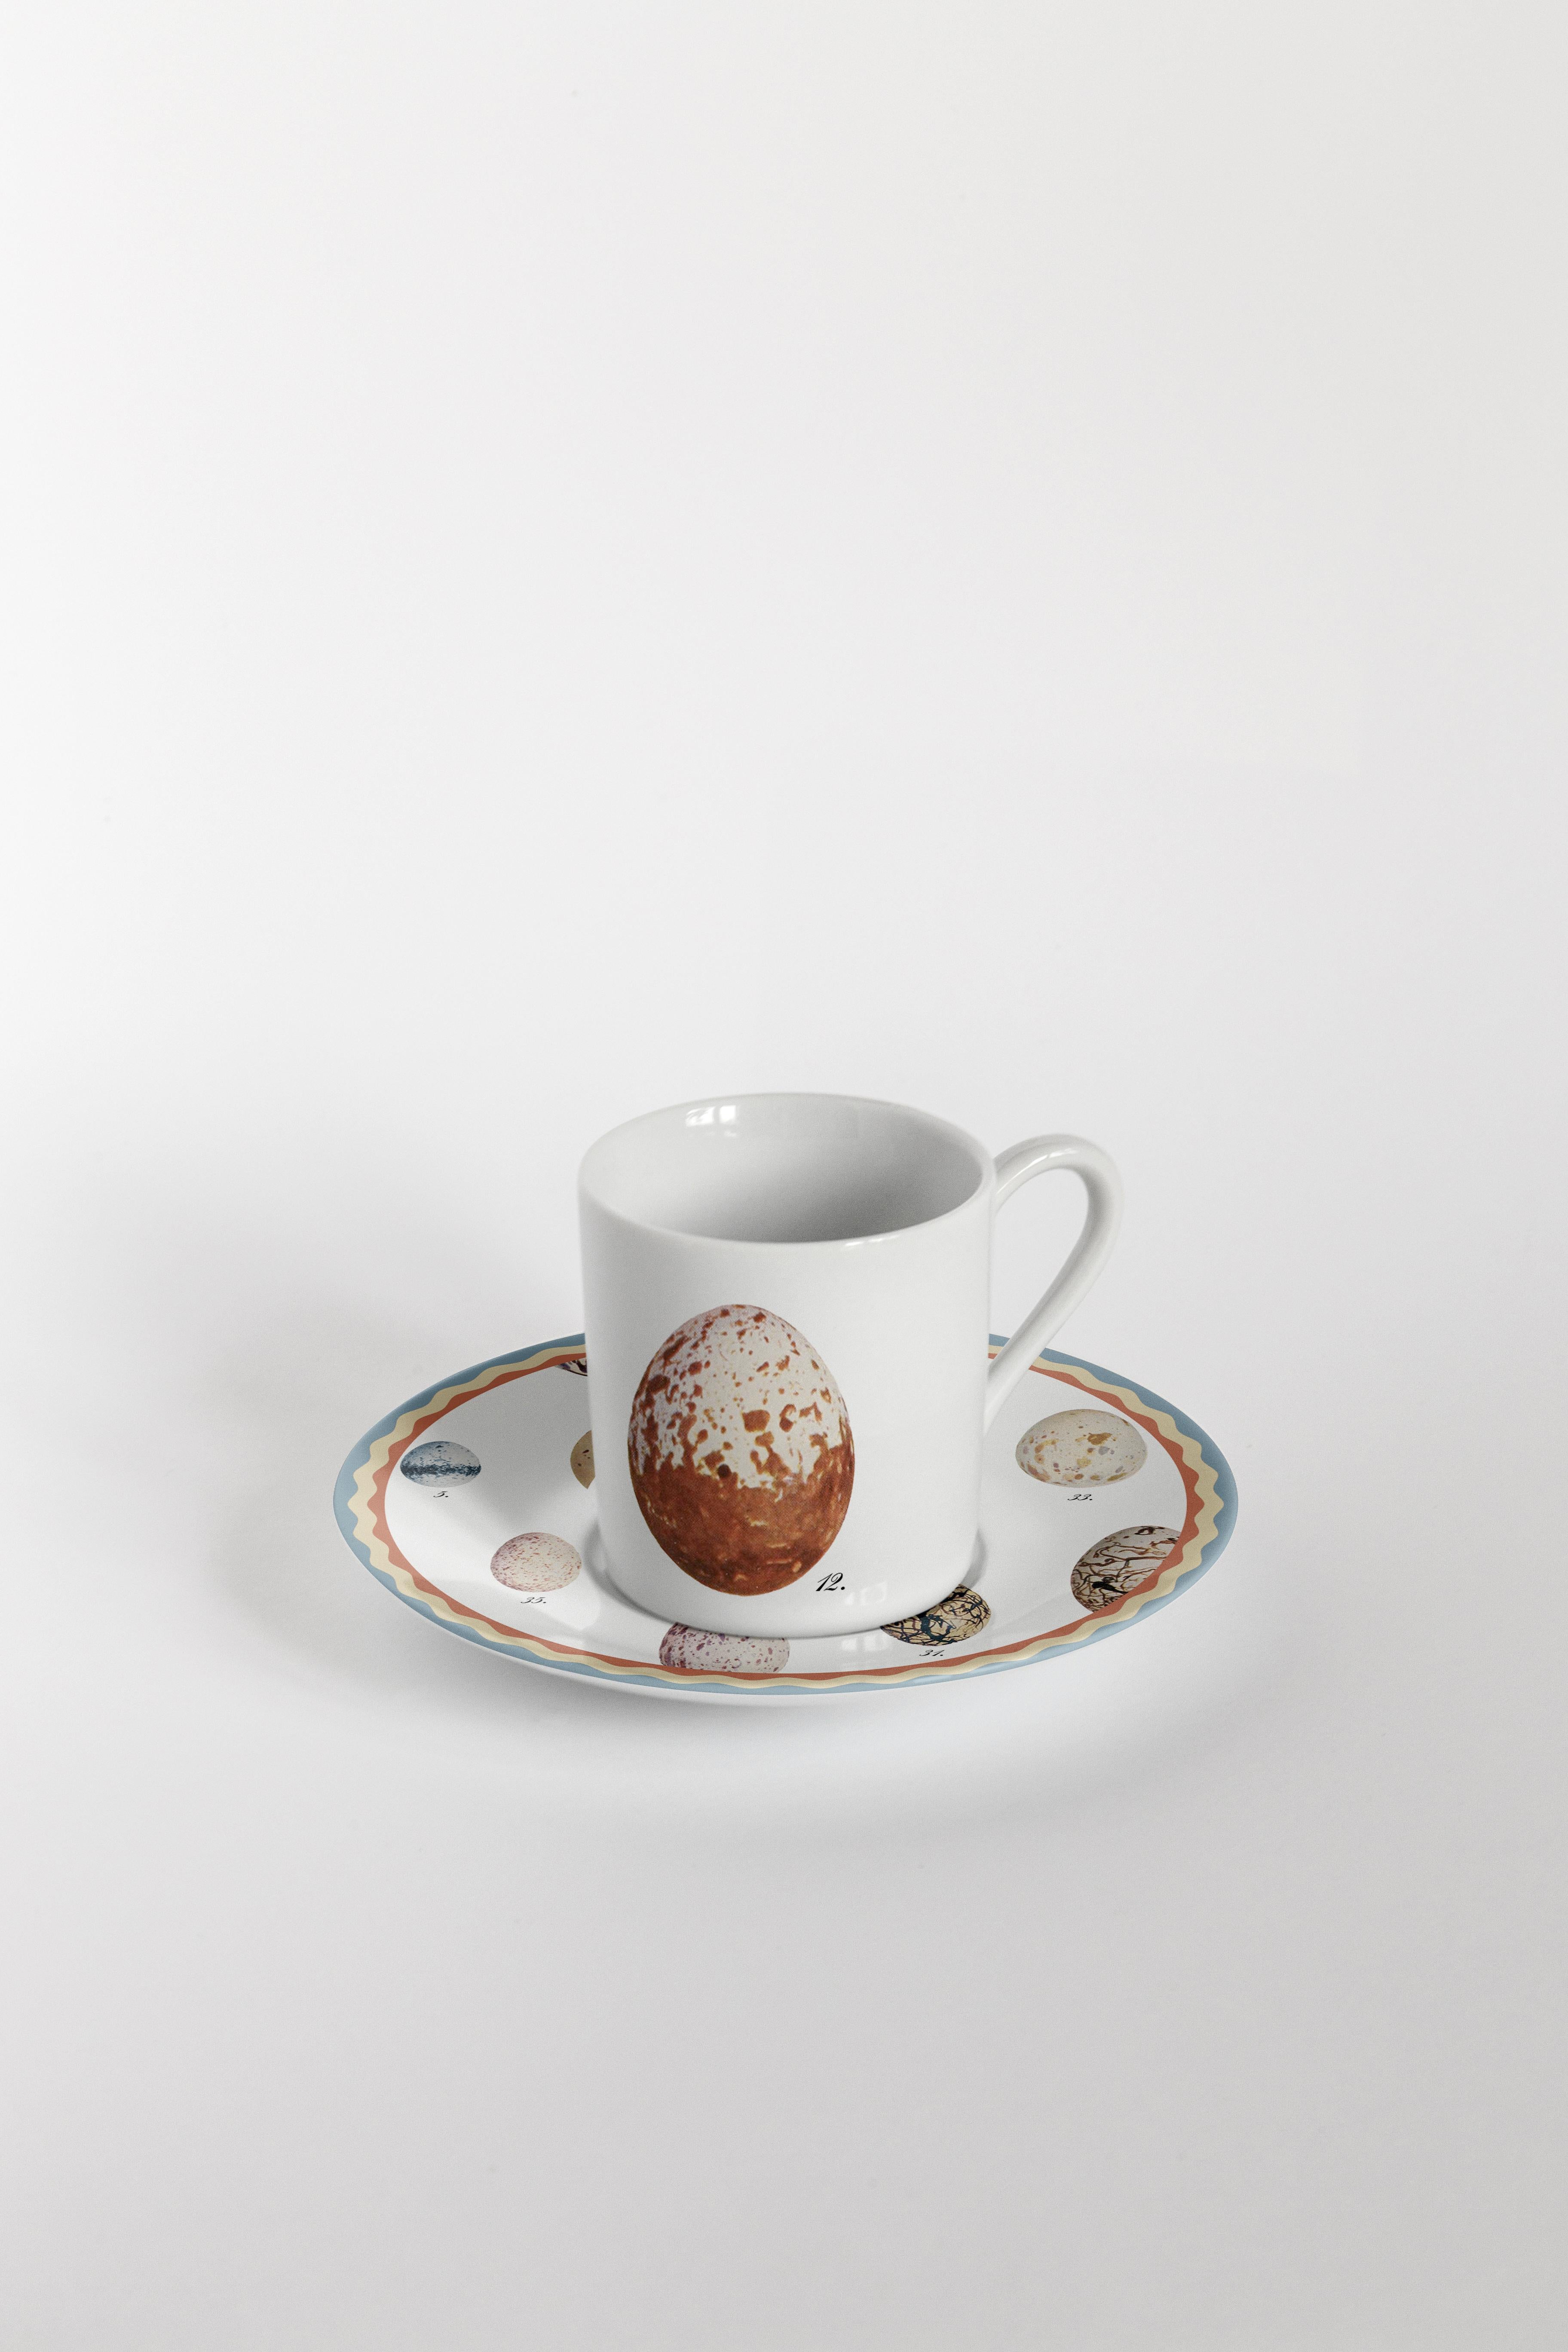 Cabinet de Curiosités, Six Contemporary Decorated Coffee Cups with Plates For Sale 2